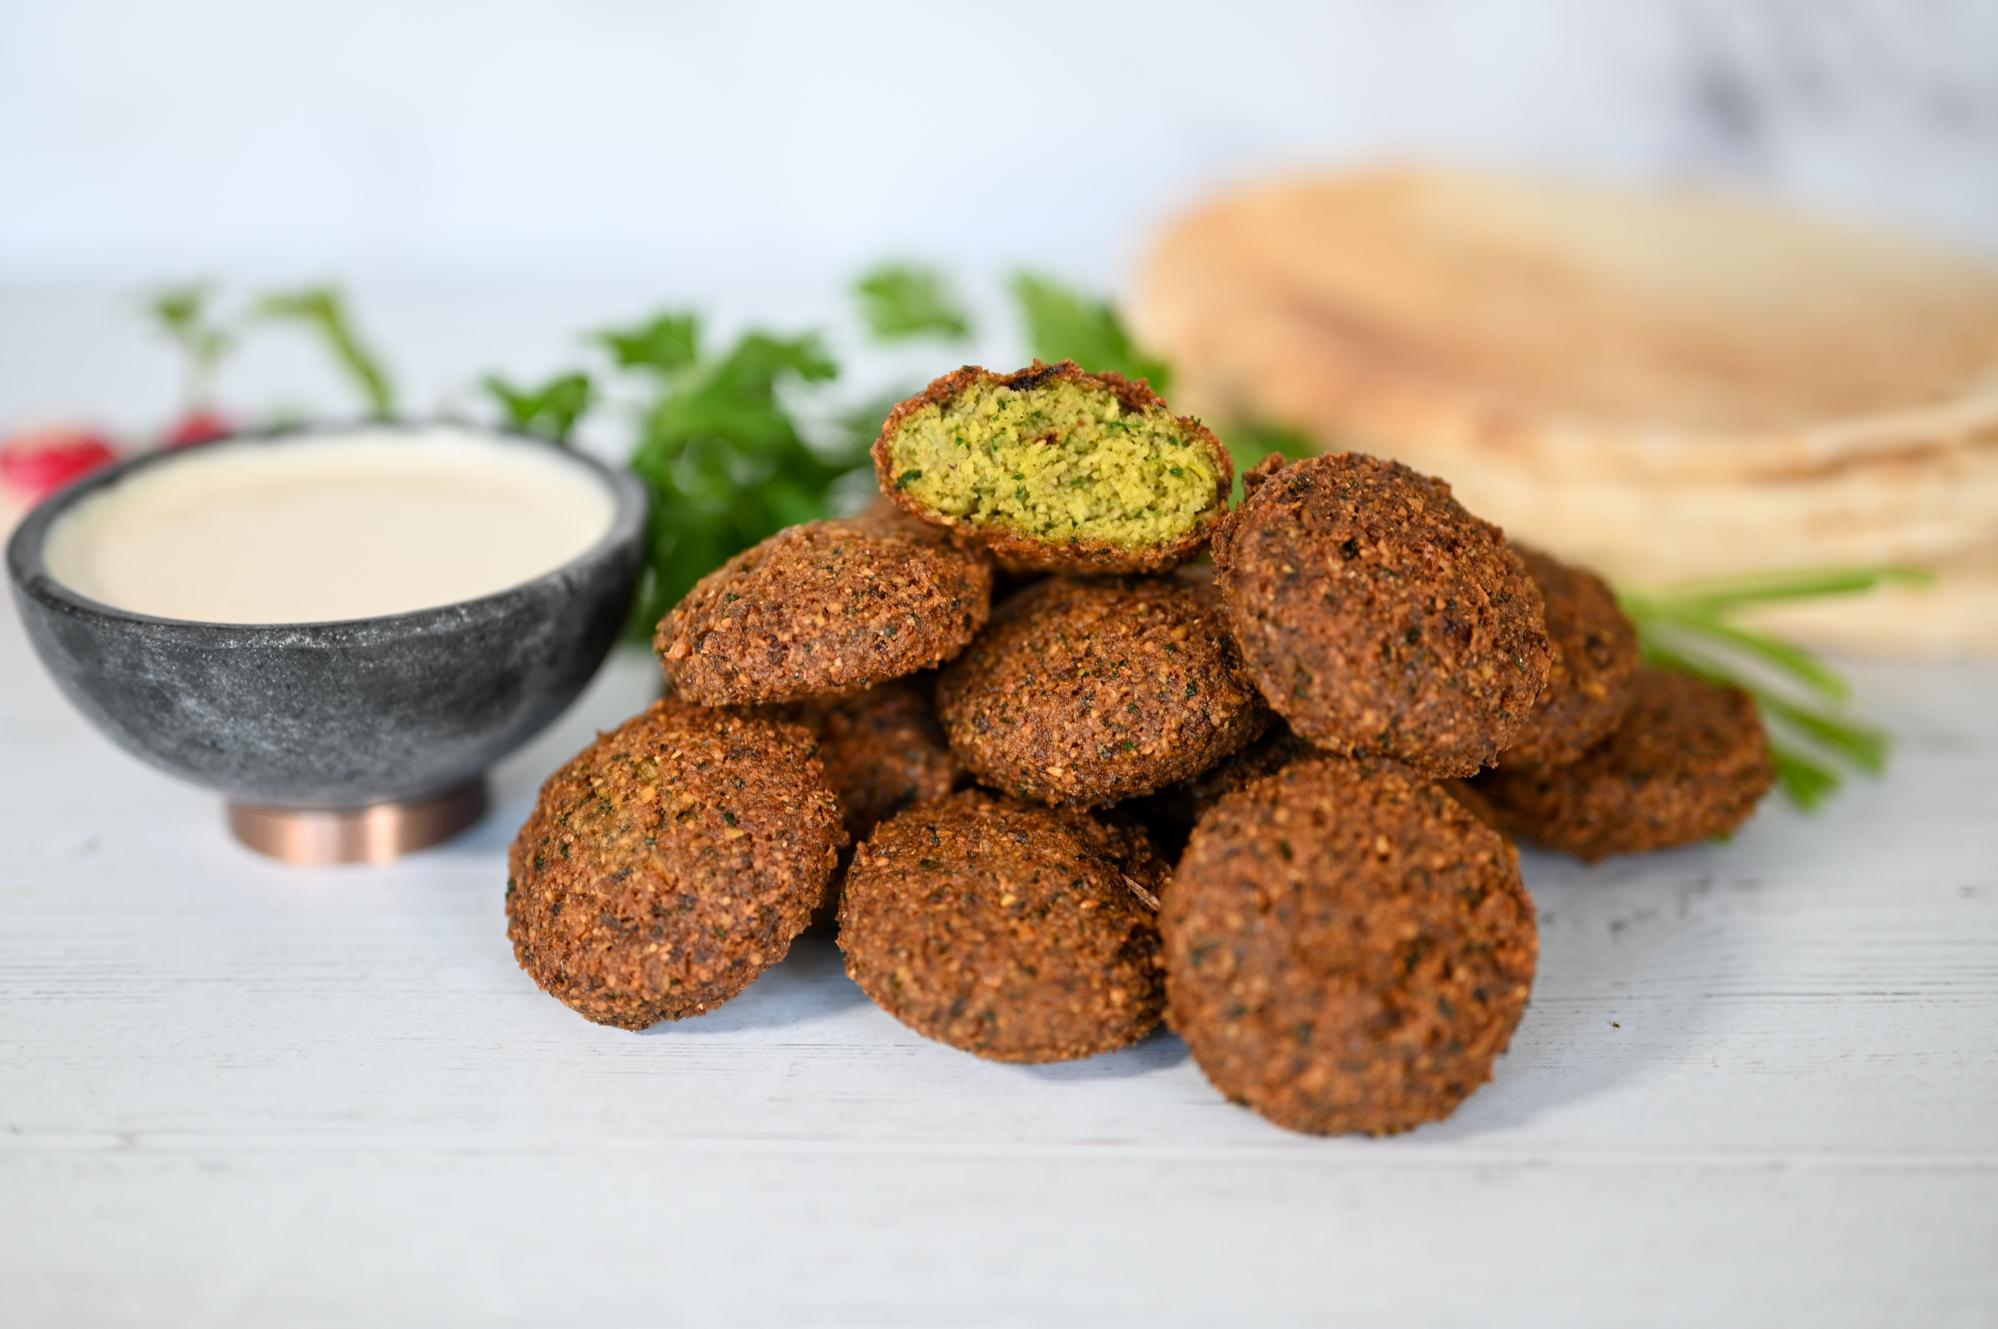  Get ready to experience a party in your mouth with these fragrant and flavorful falafels.